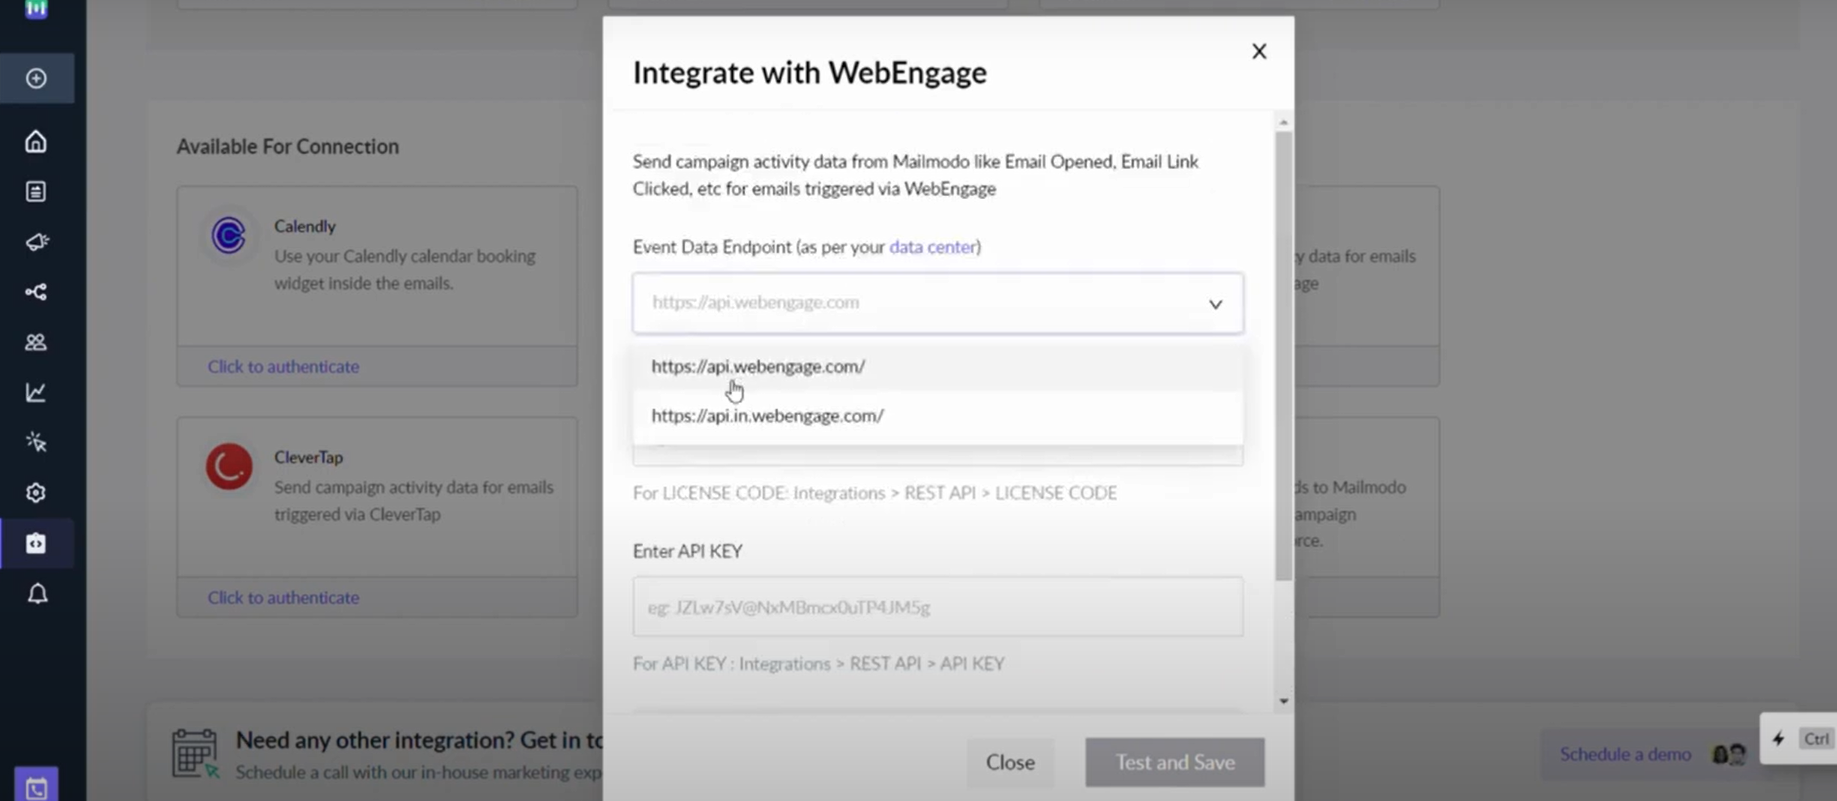 Getting started with WebEngage integration